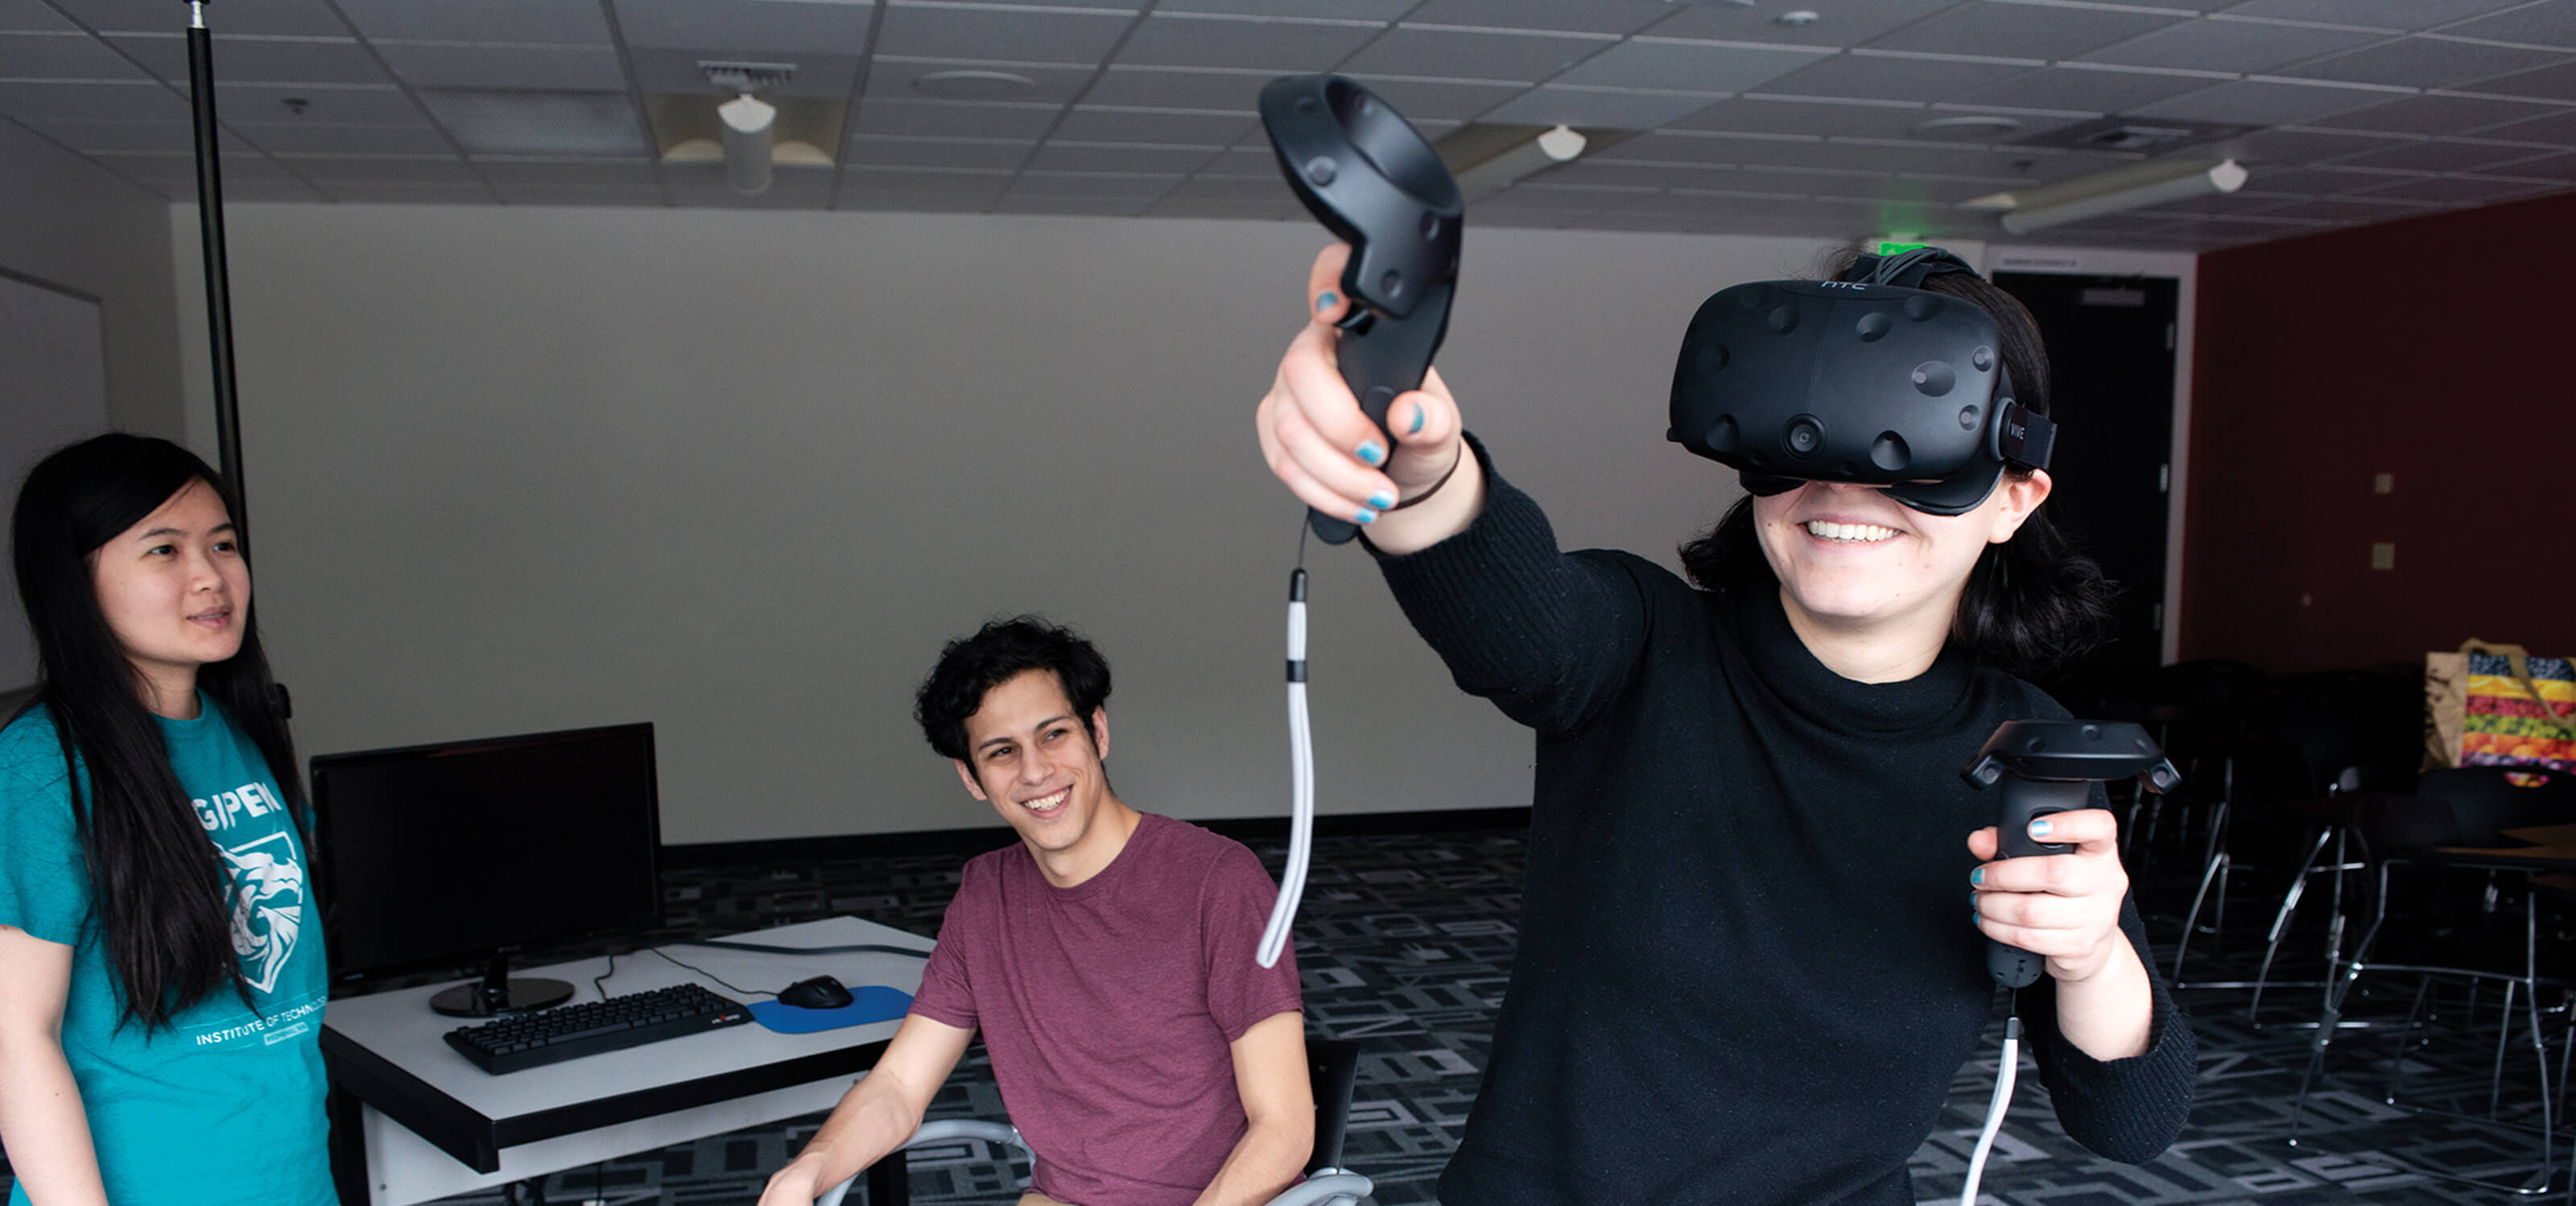 A DigiPen student tries out their VR game team project as their teammates smile at them.